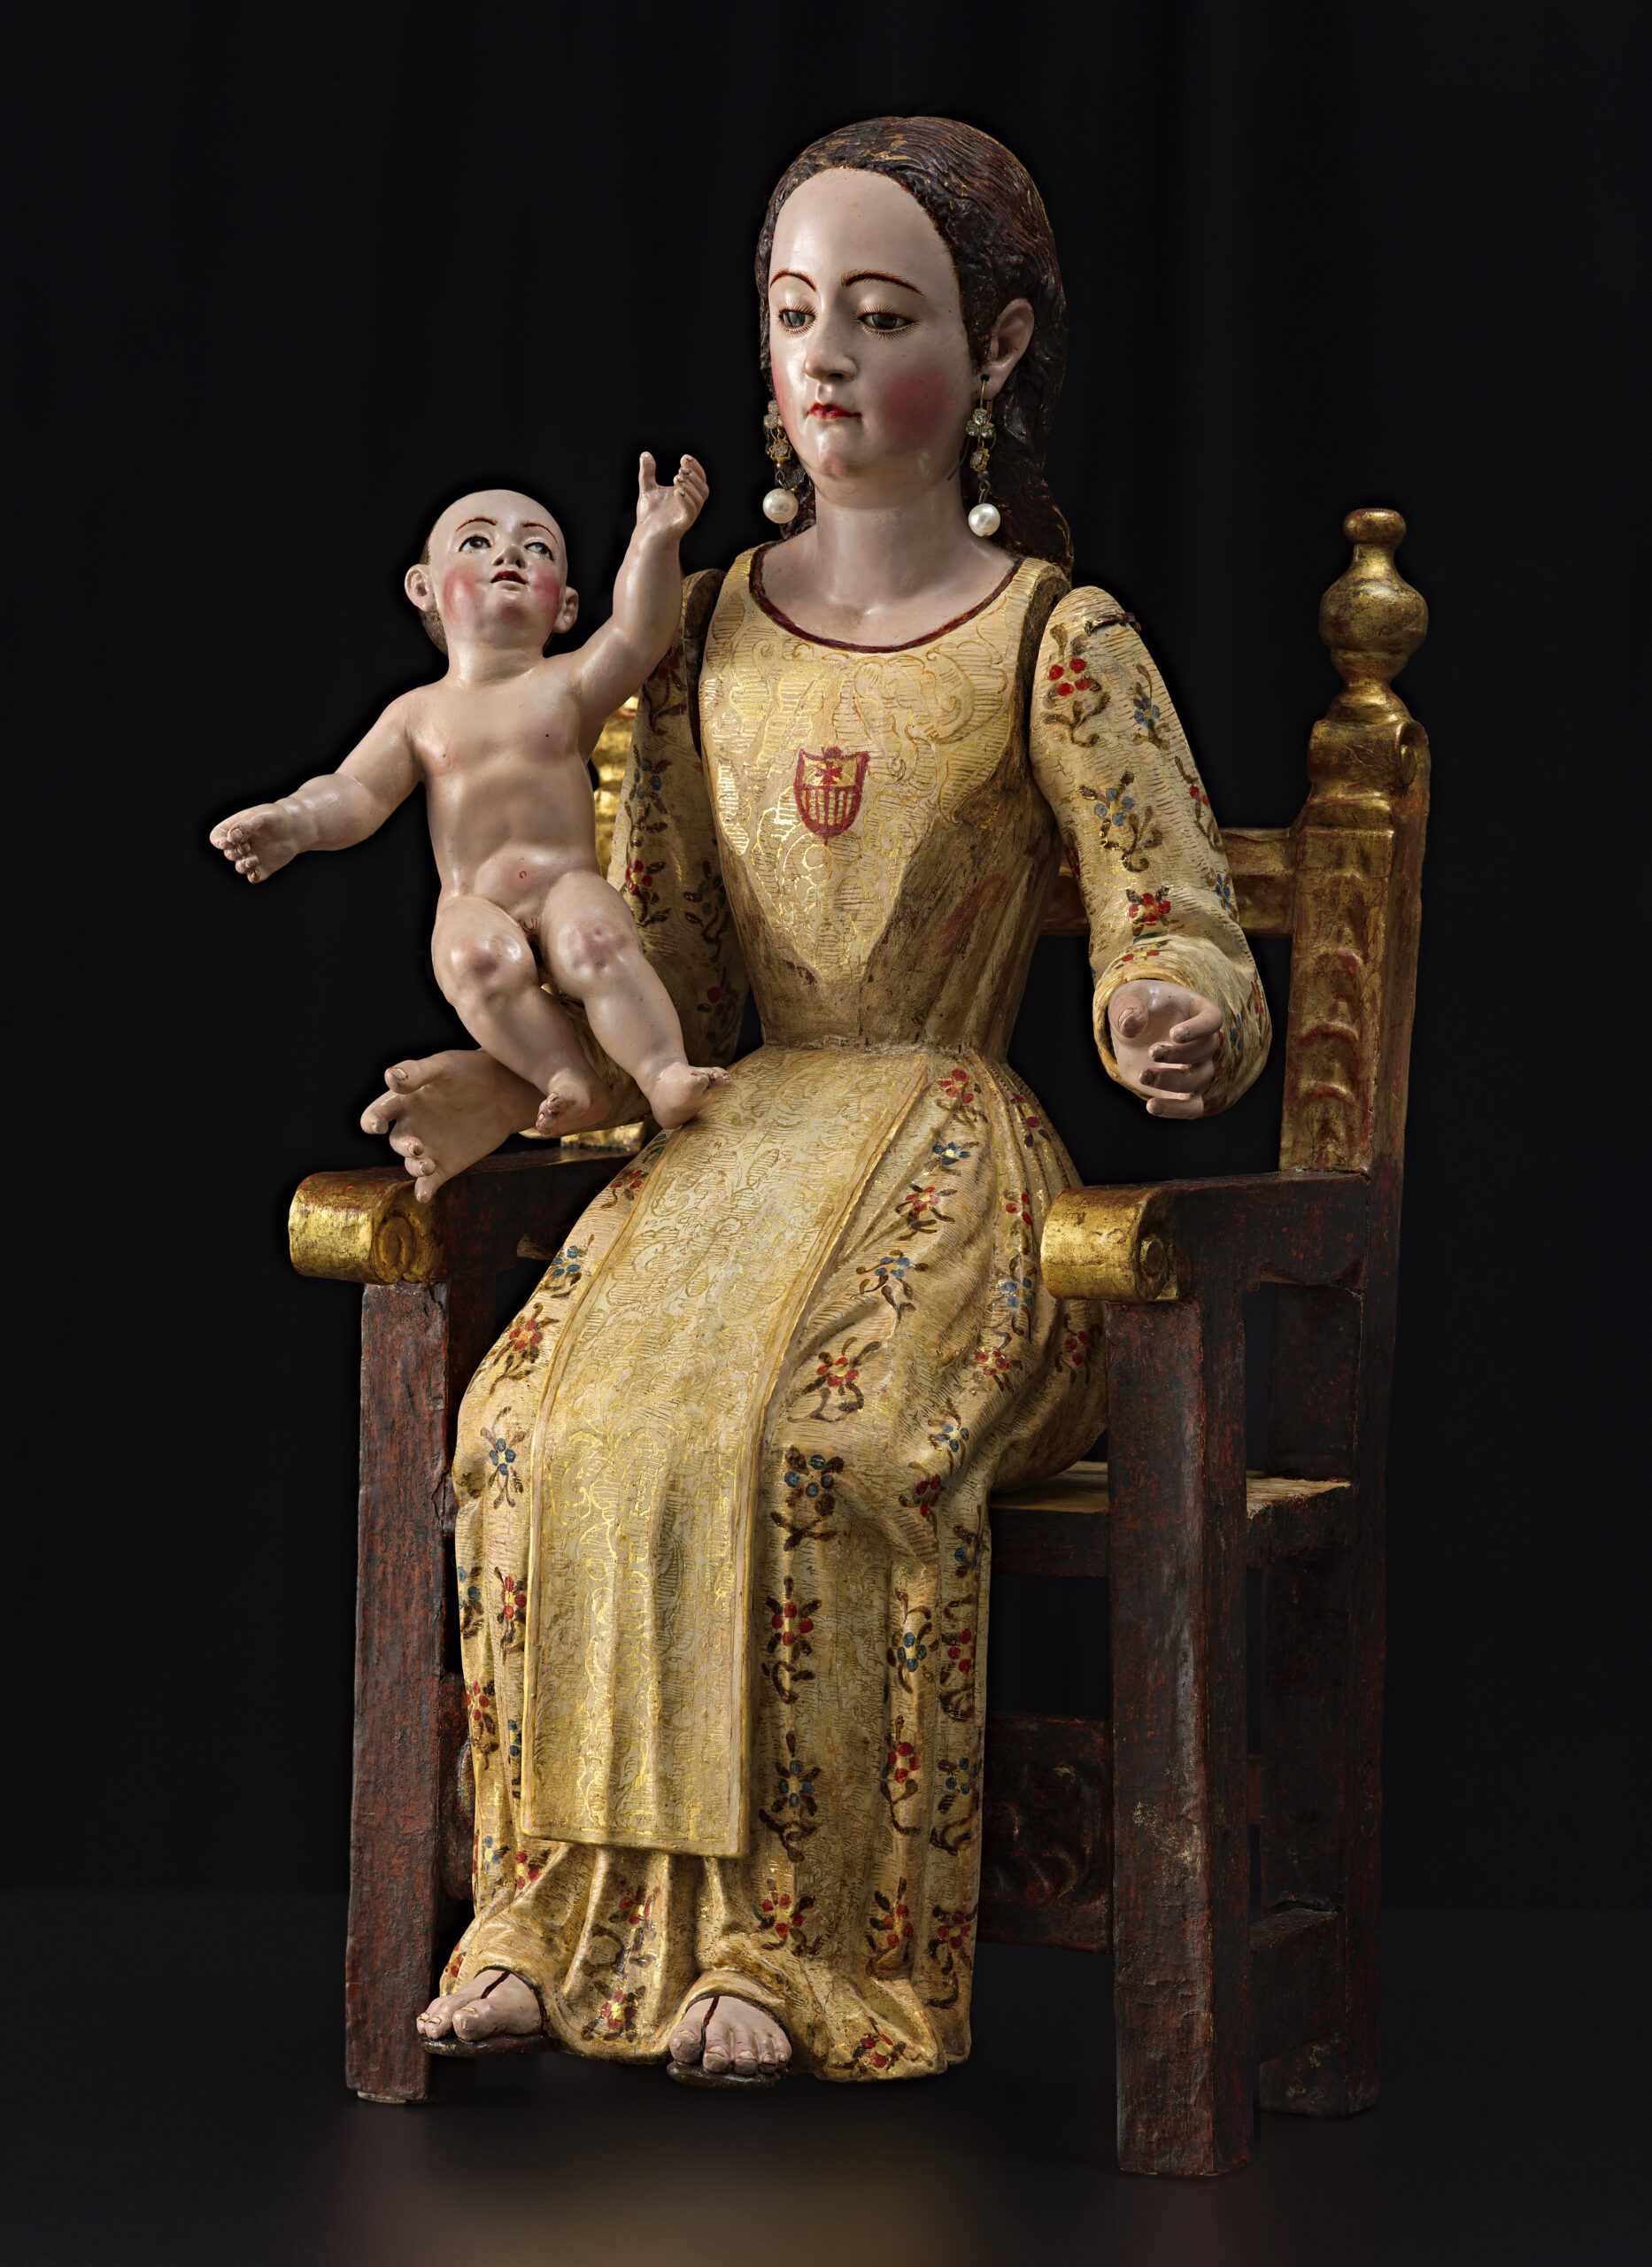 Virgin Mary and baby sitting in a wooden chair. She is wearing a long gold gown holding